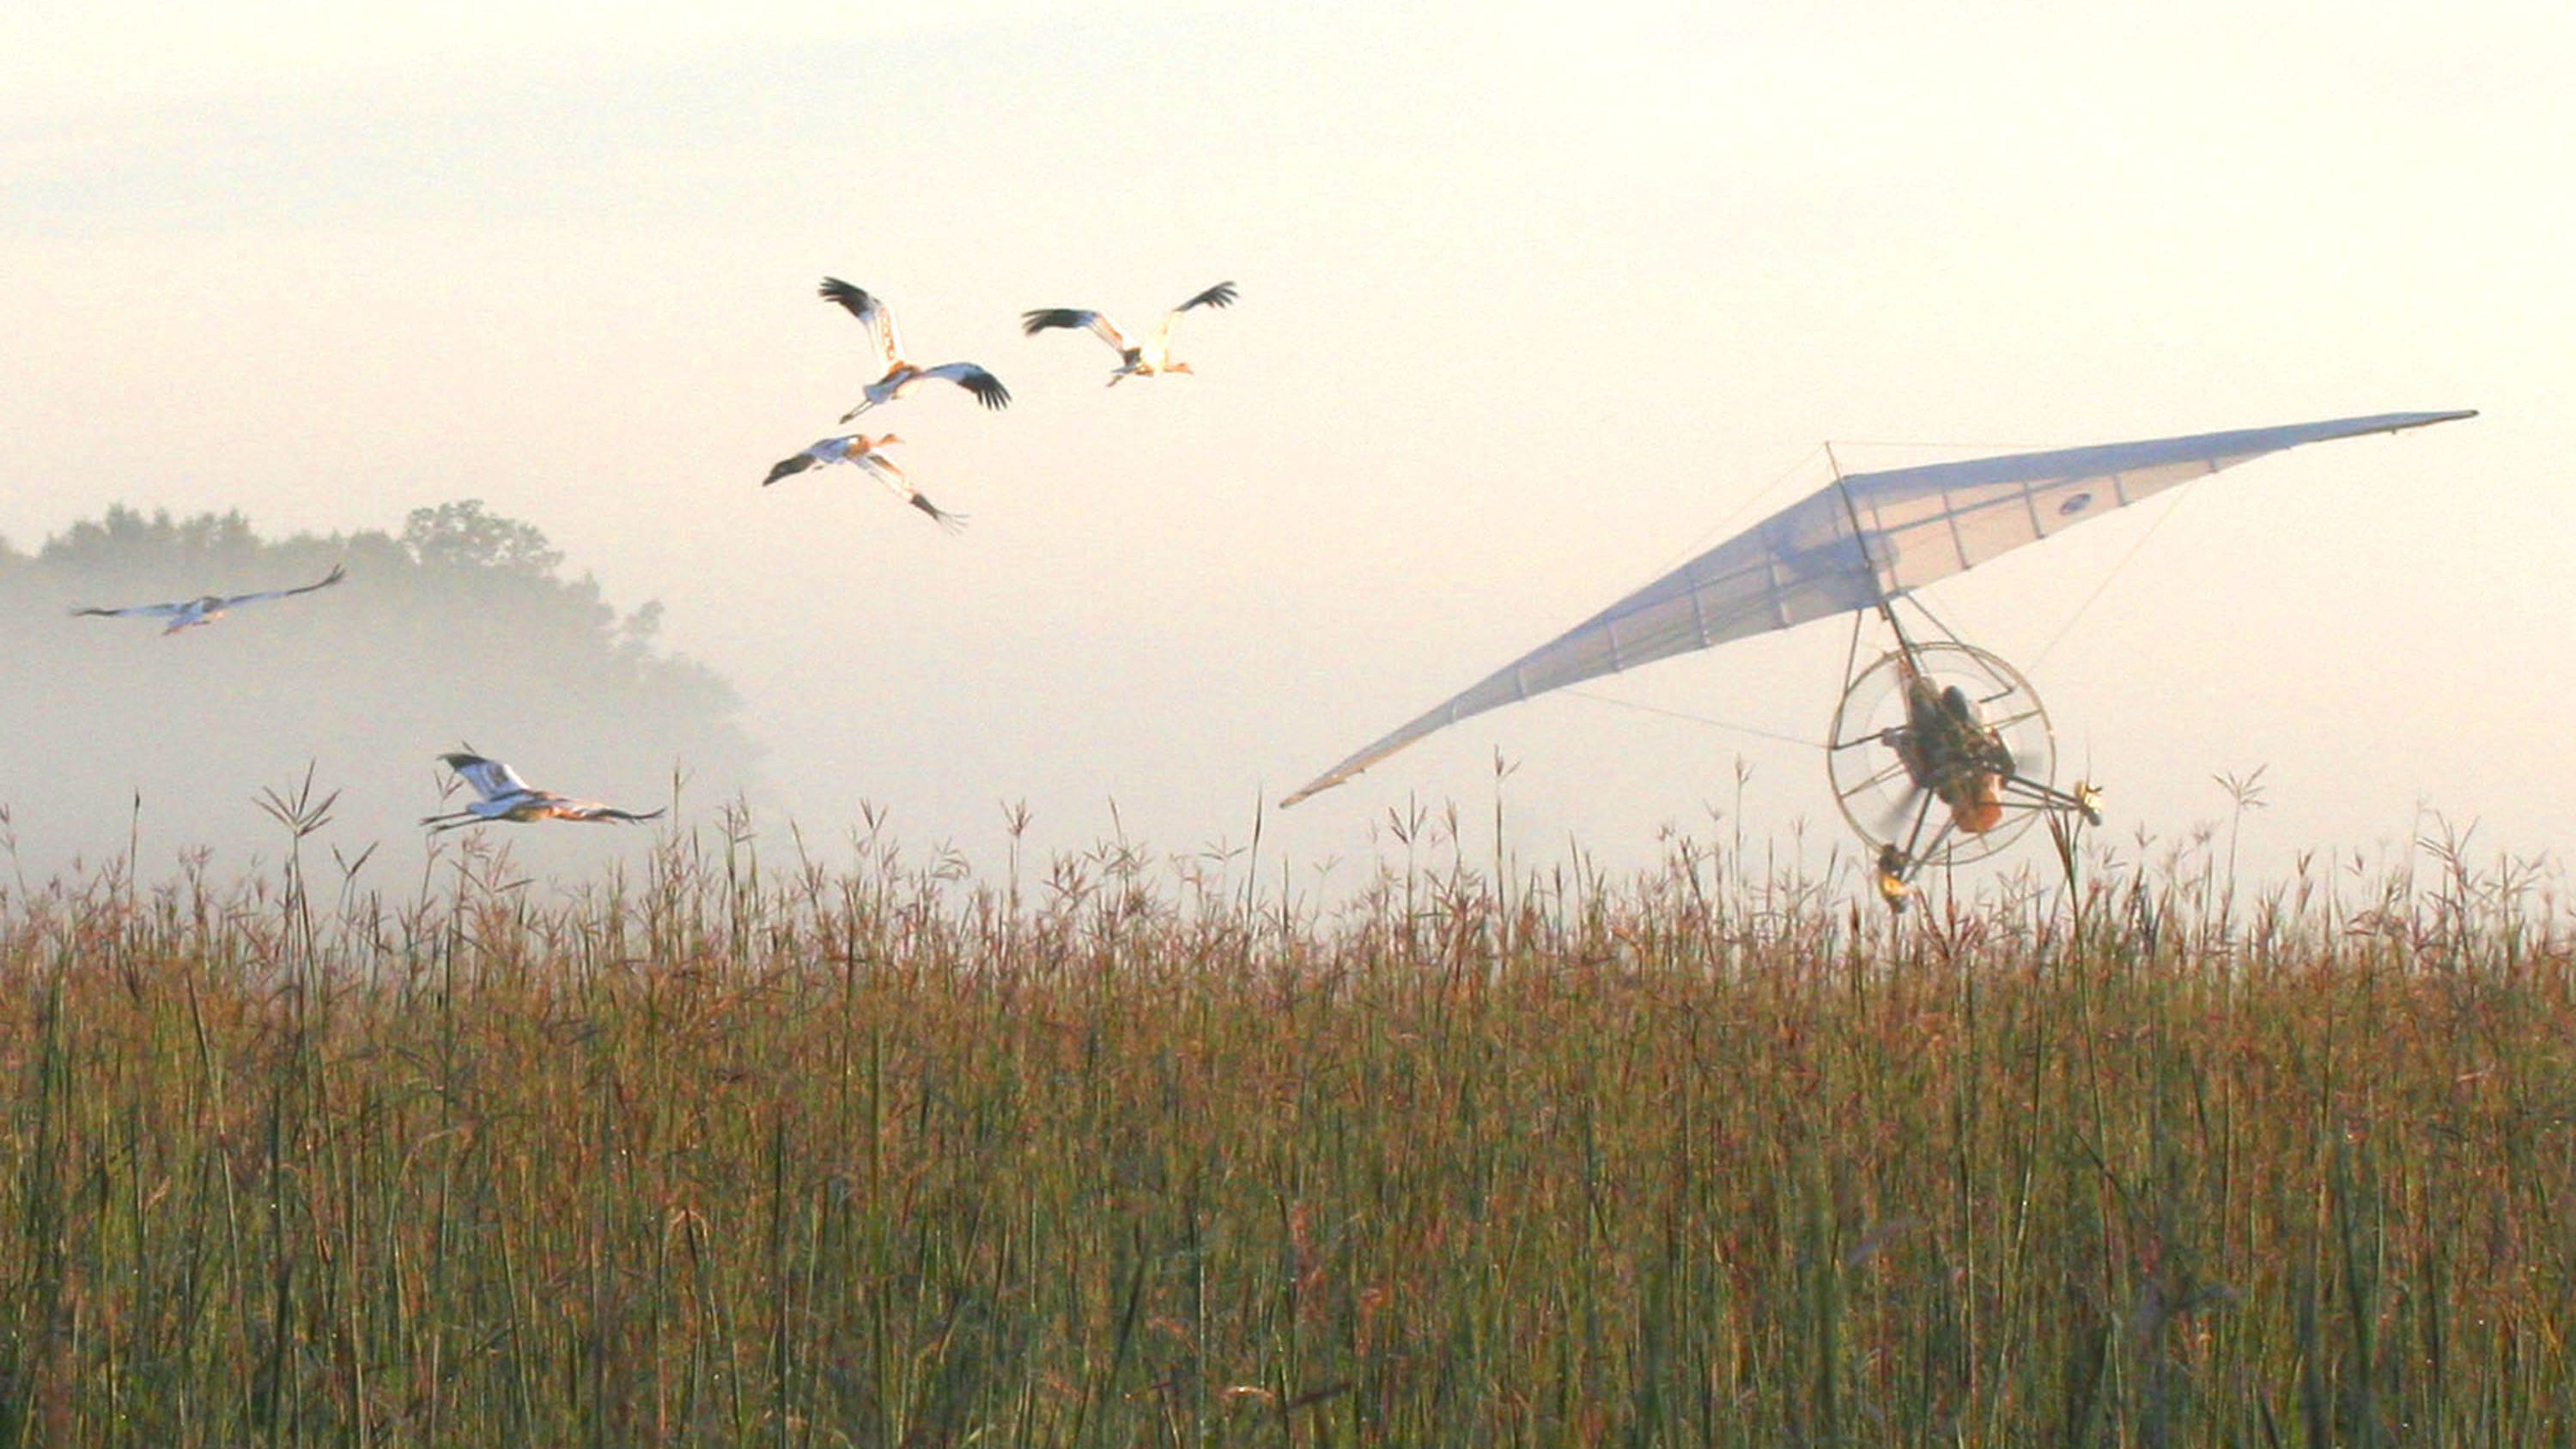 Whooping Crane Festival will celebrate whooping cranes, wildlife